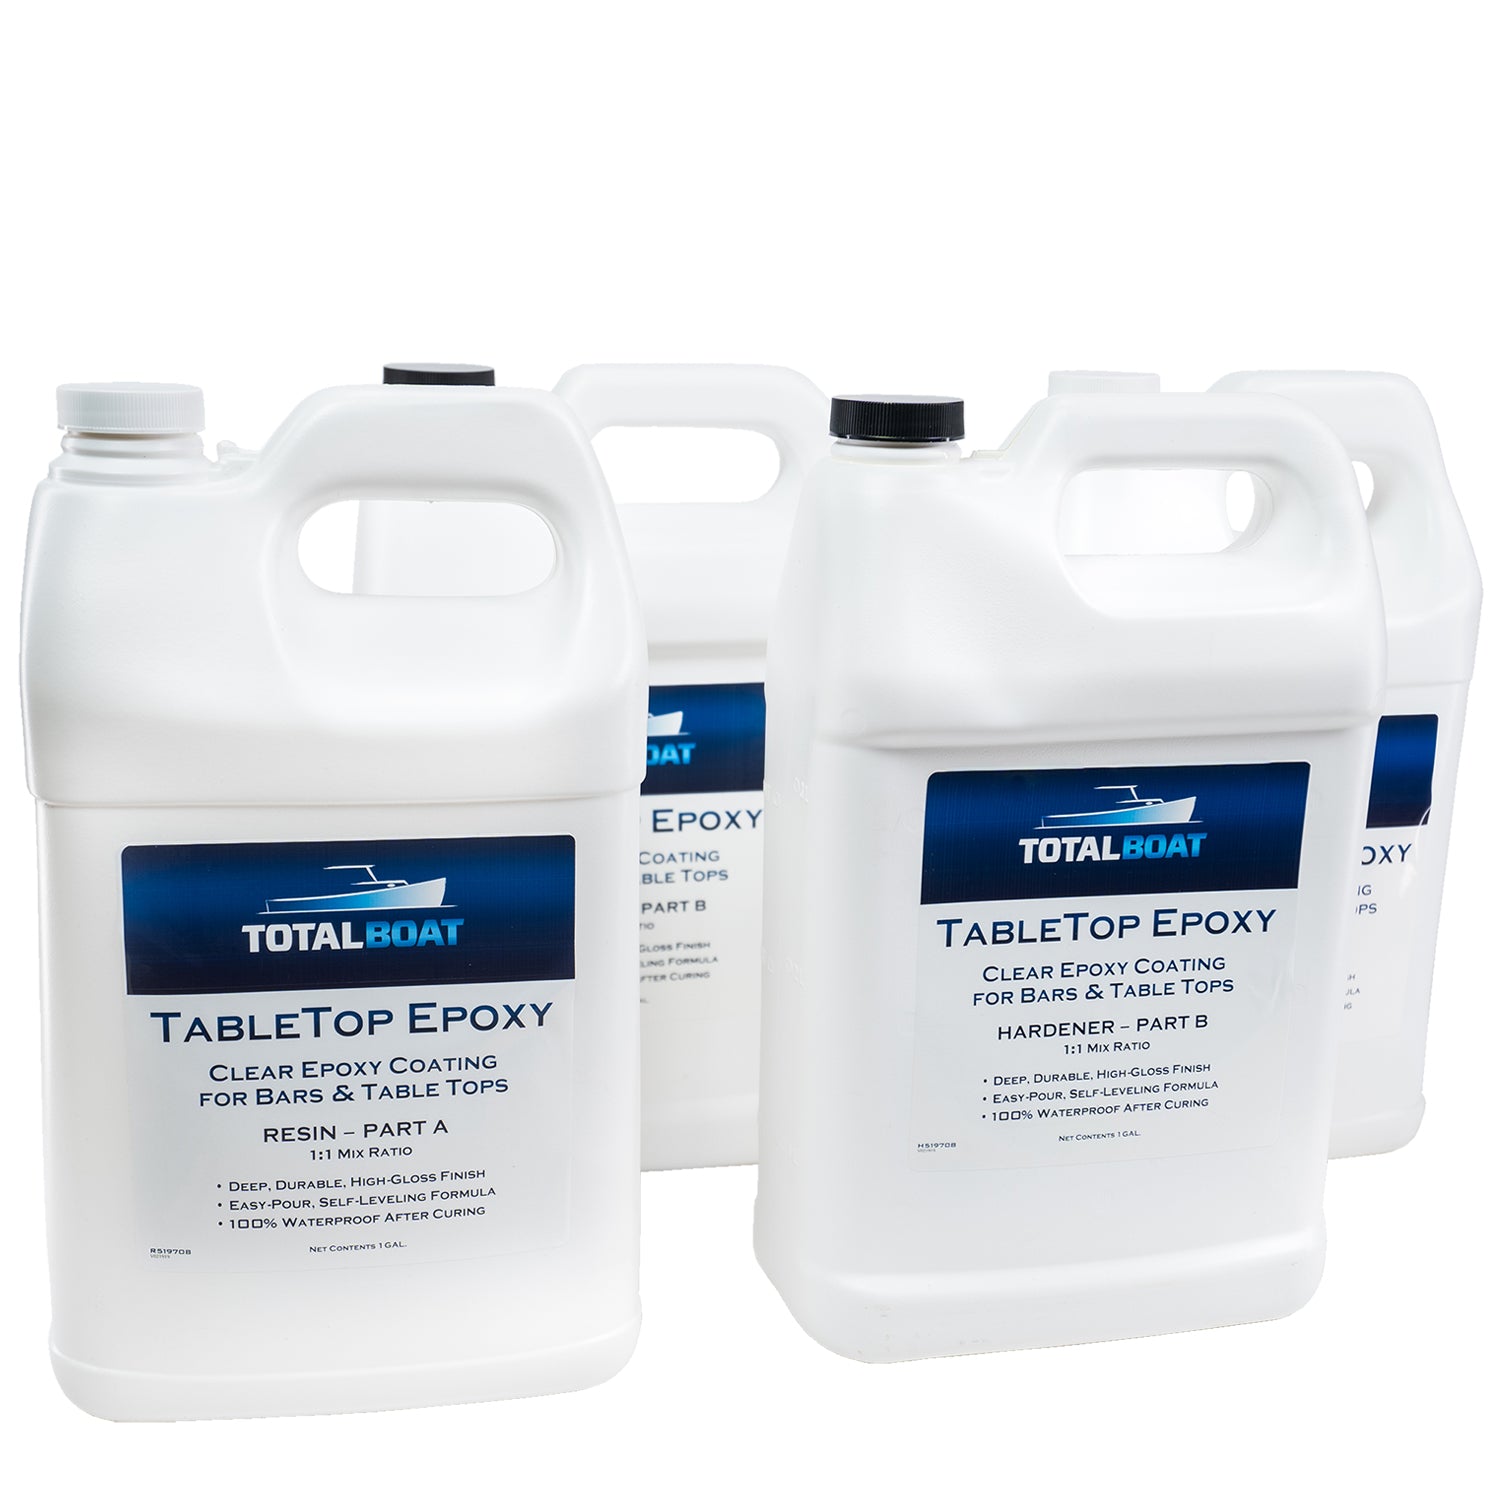 TotalBoat Tabletop Epoxy Crystal Clear Resin 2 Quart Kit for Bars & Tables